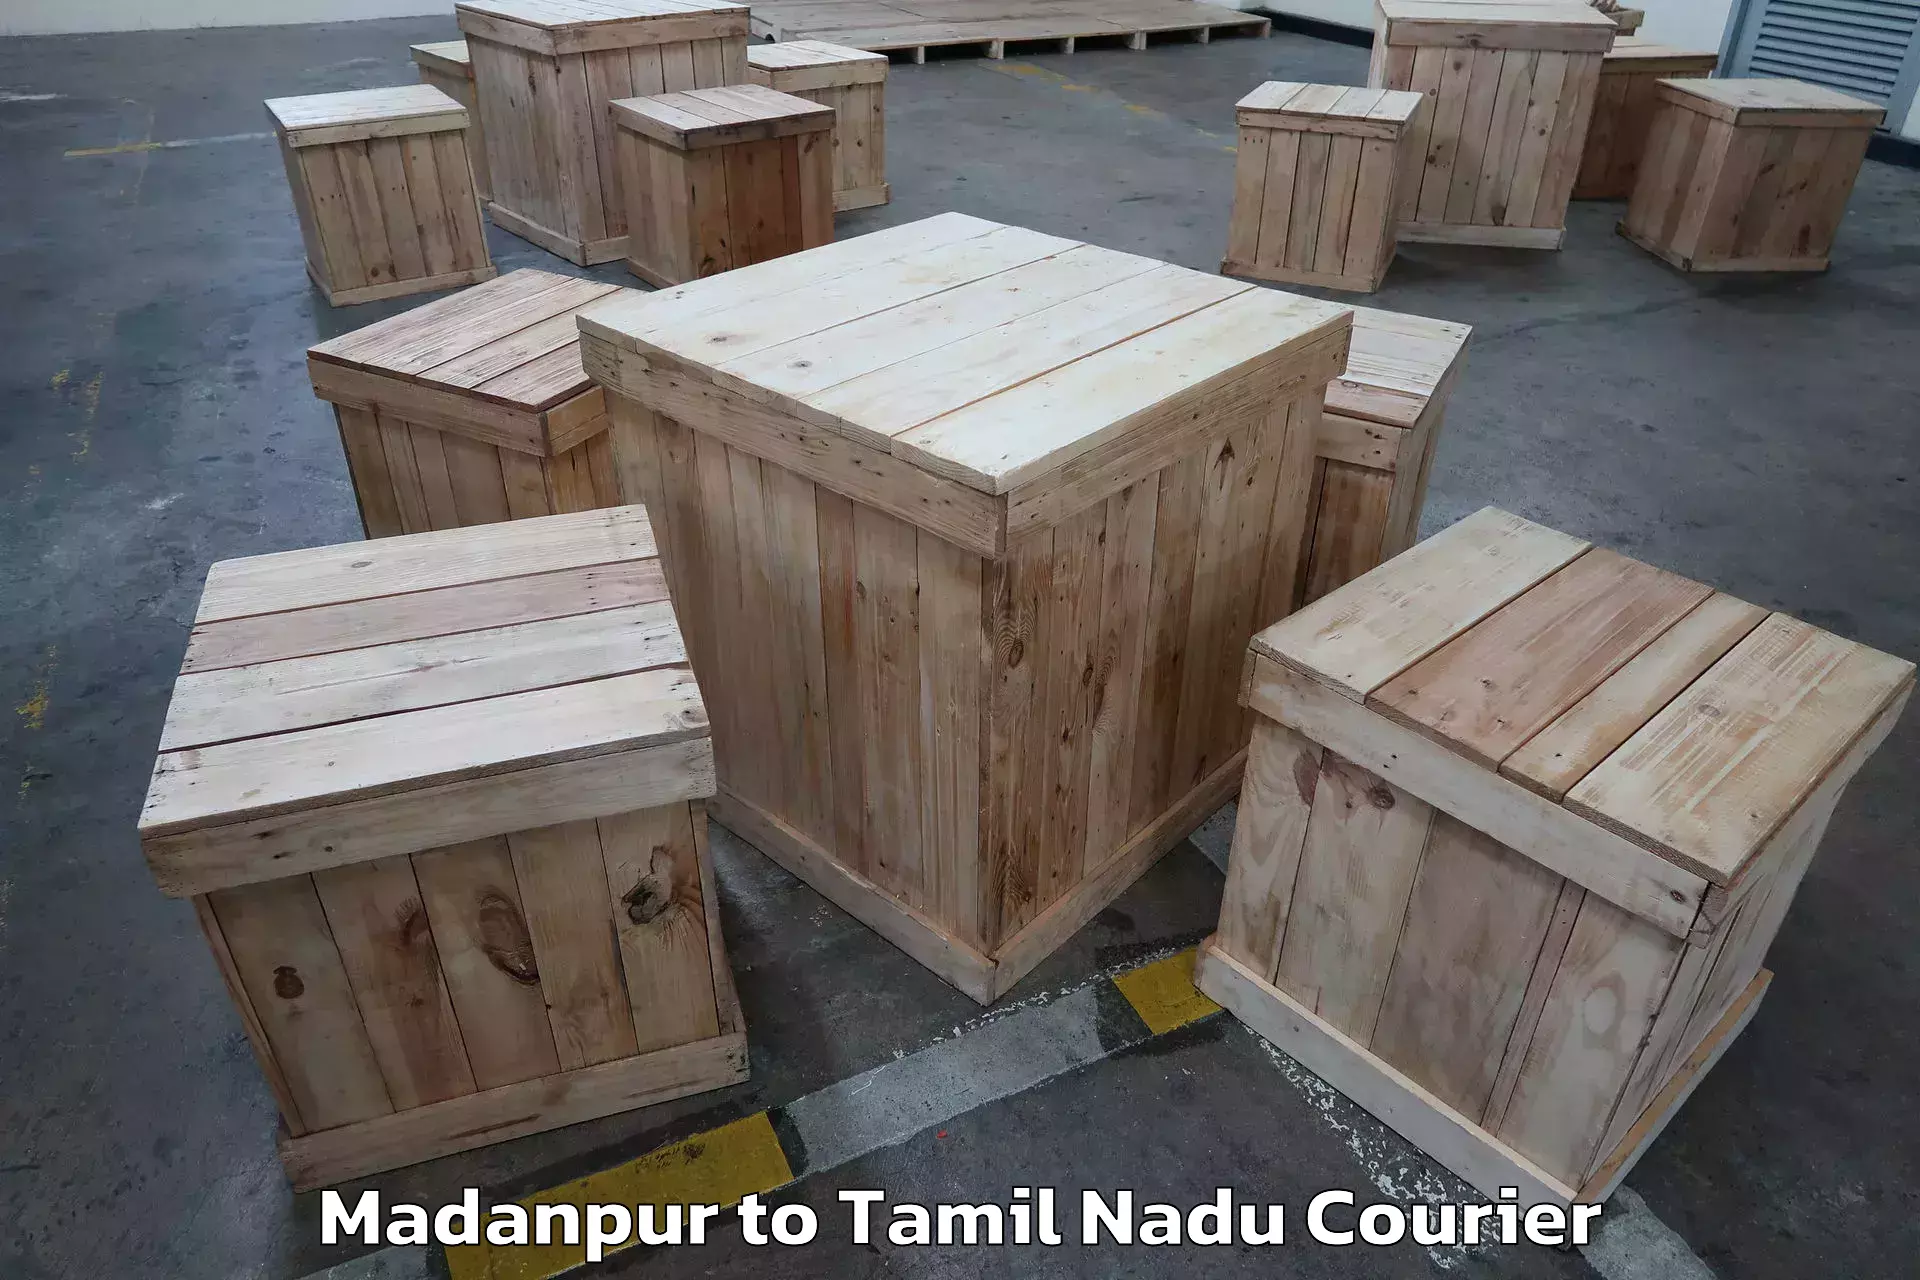 Expert goods movers Madanpur to Vellore Institute of Technology